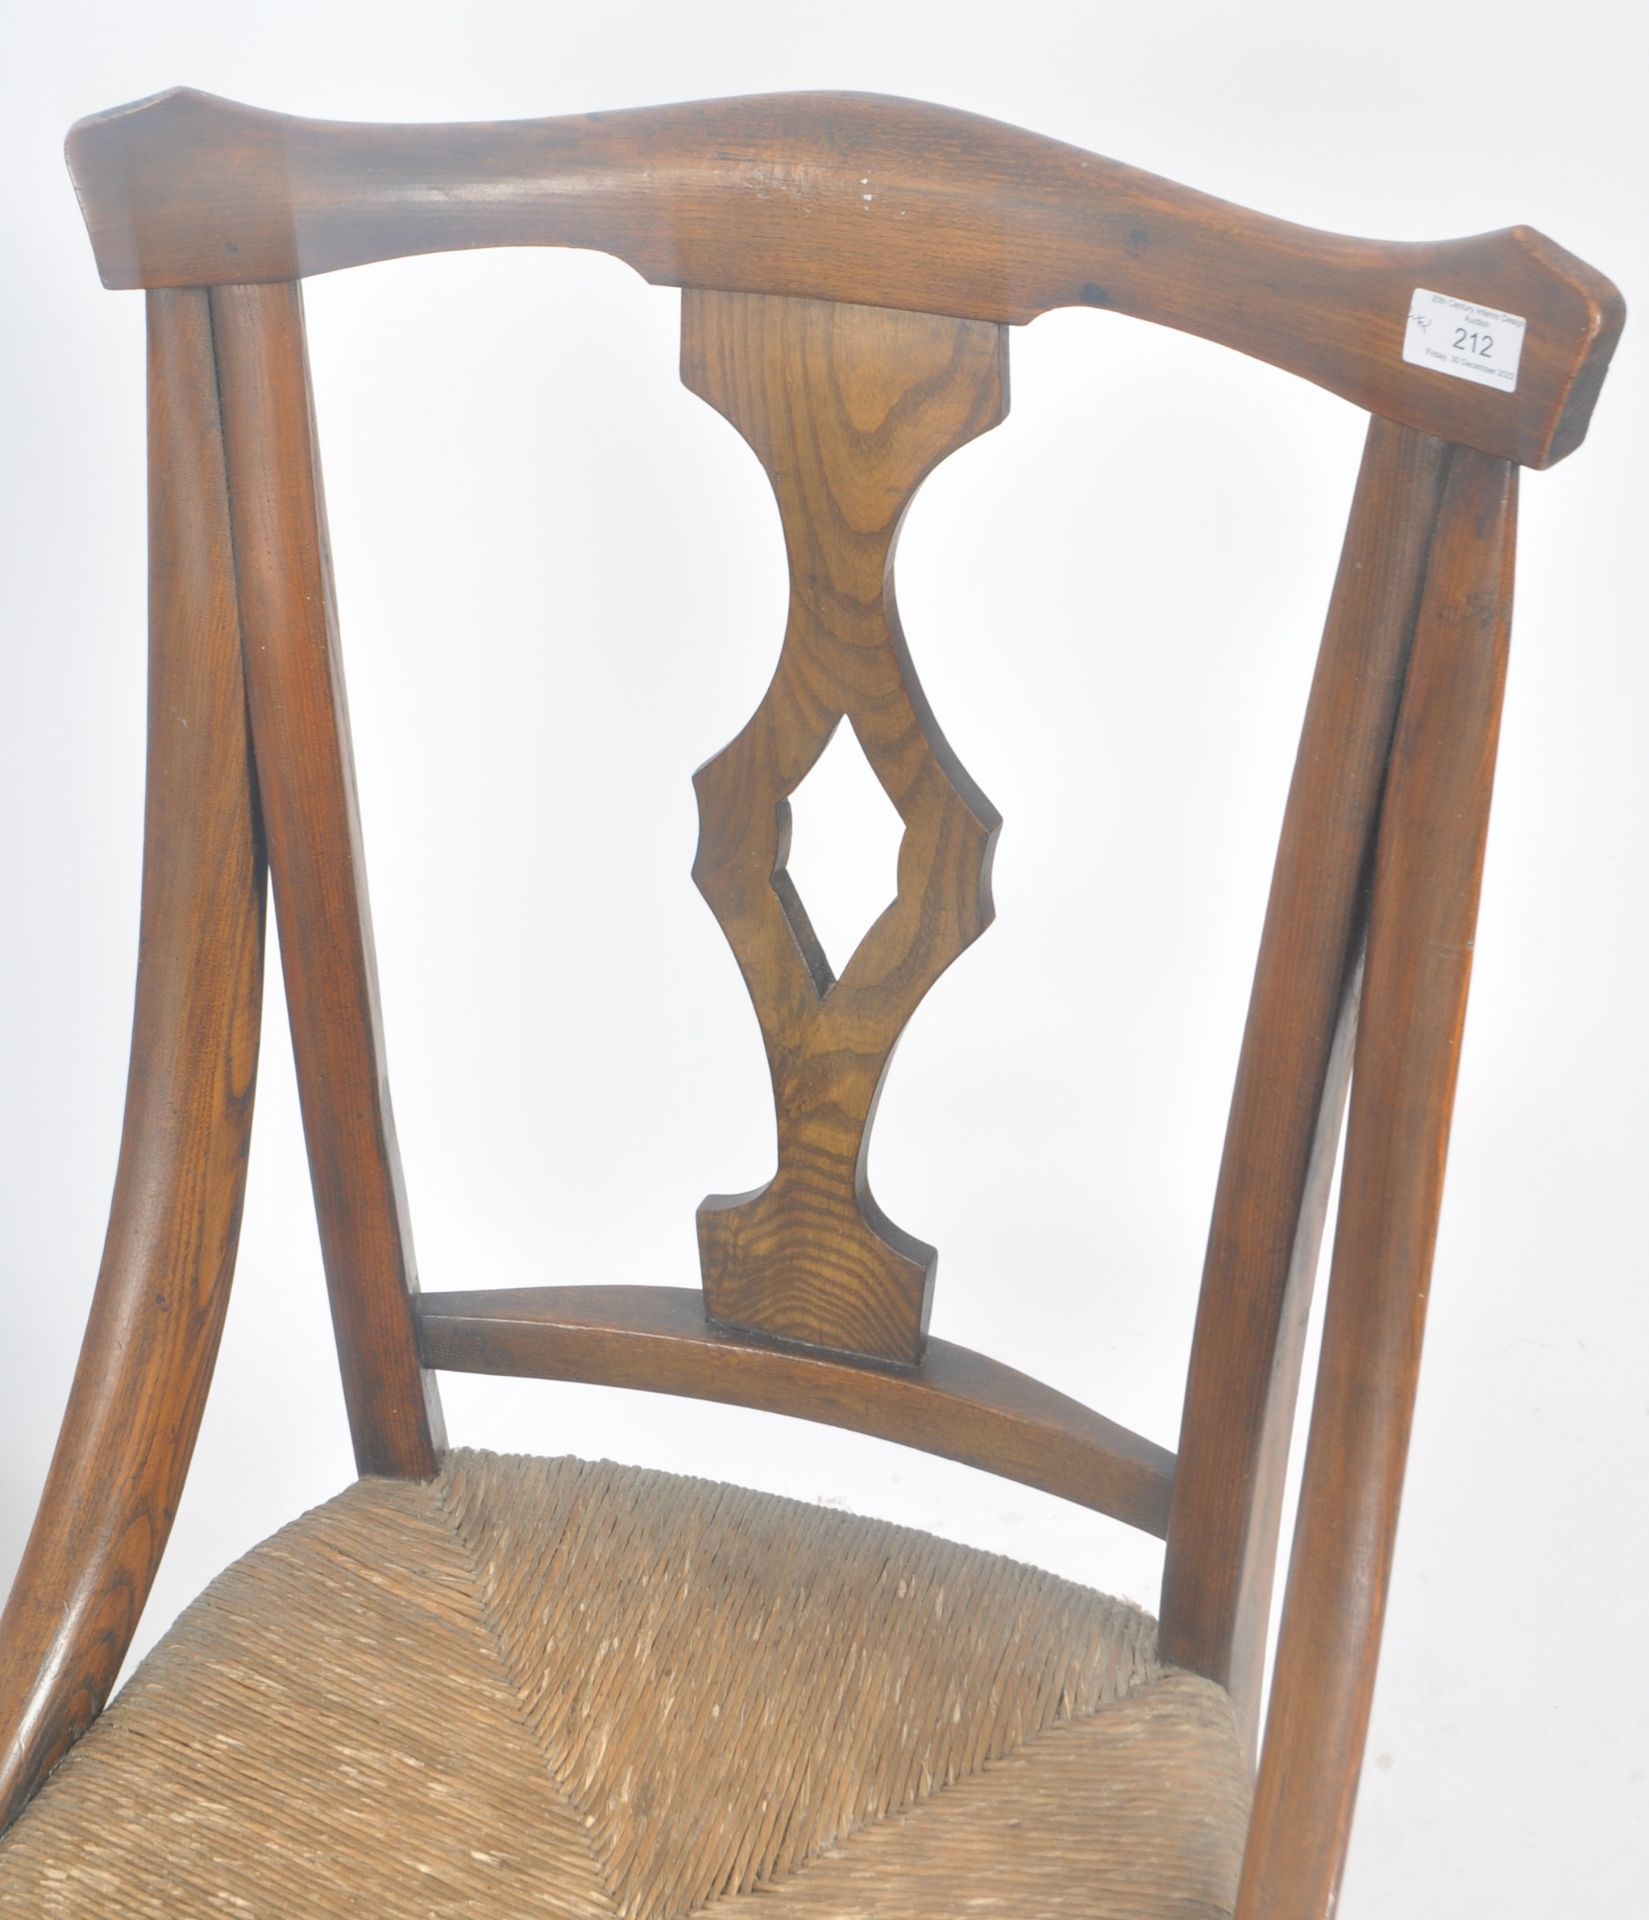 MATCHING PAIR OF ARTS & CRAFTS OAK AND RUSH SEAT CHAIRS - Image 3 of 6